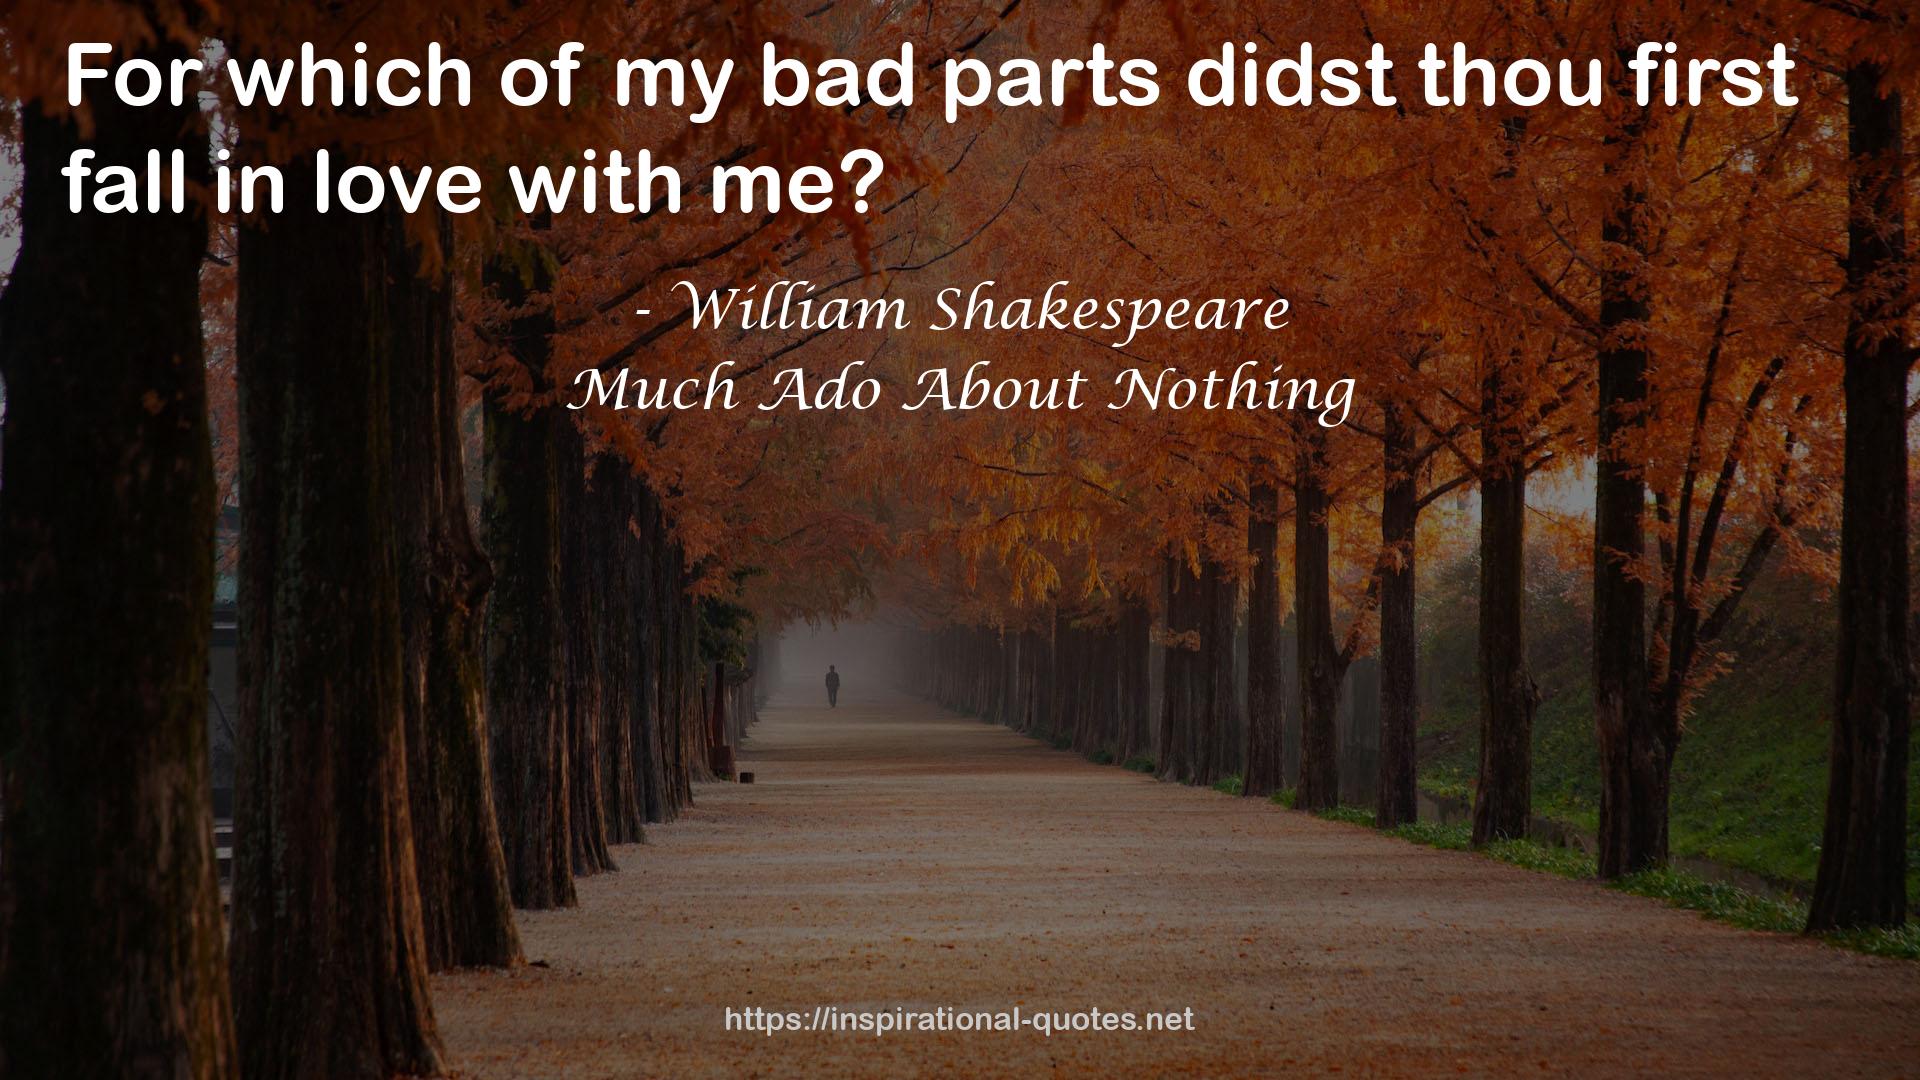 my bad parts  QUOTES